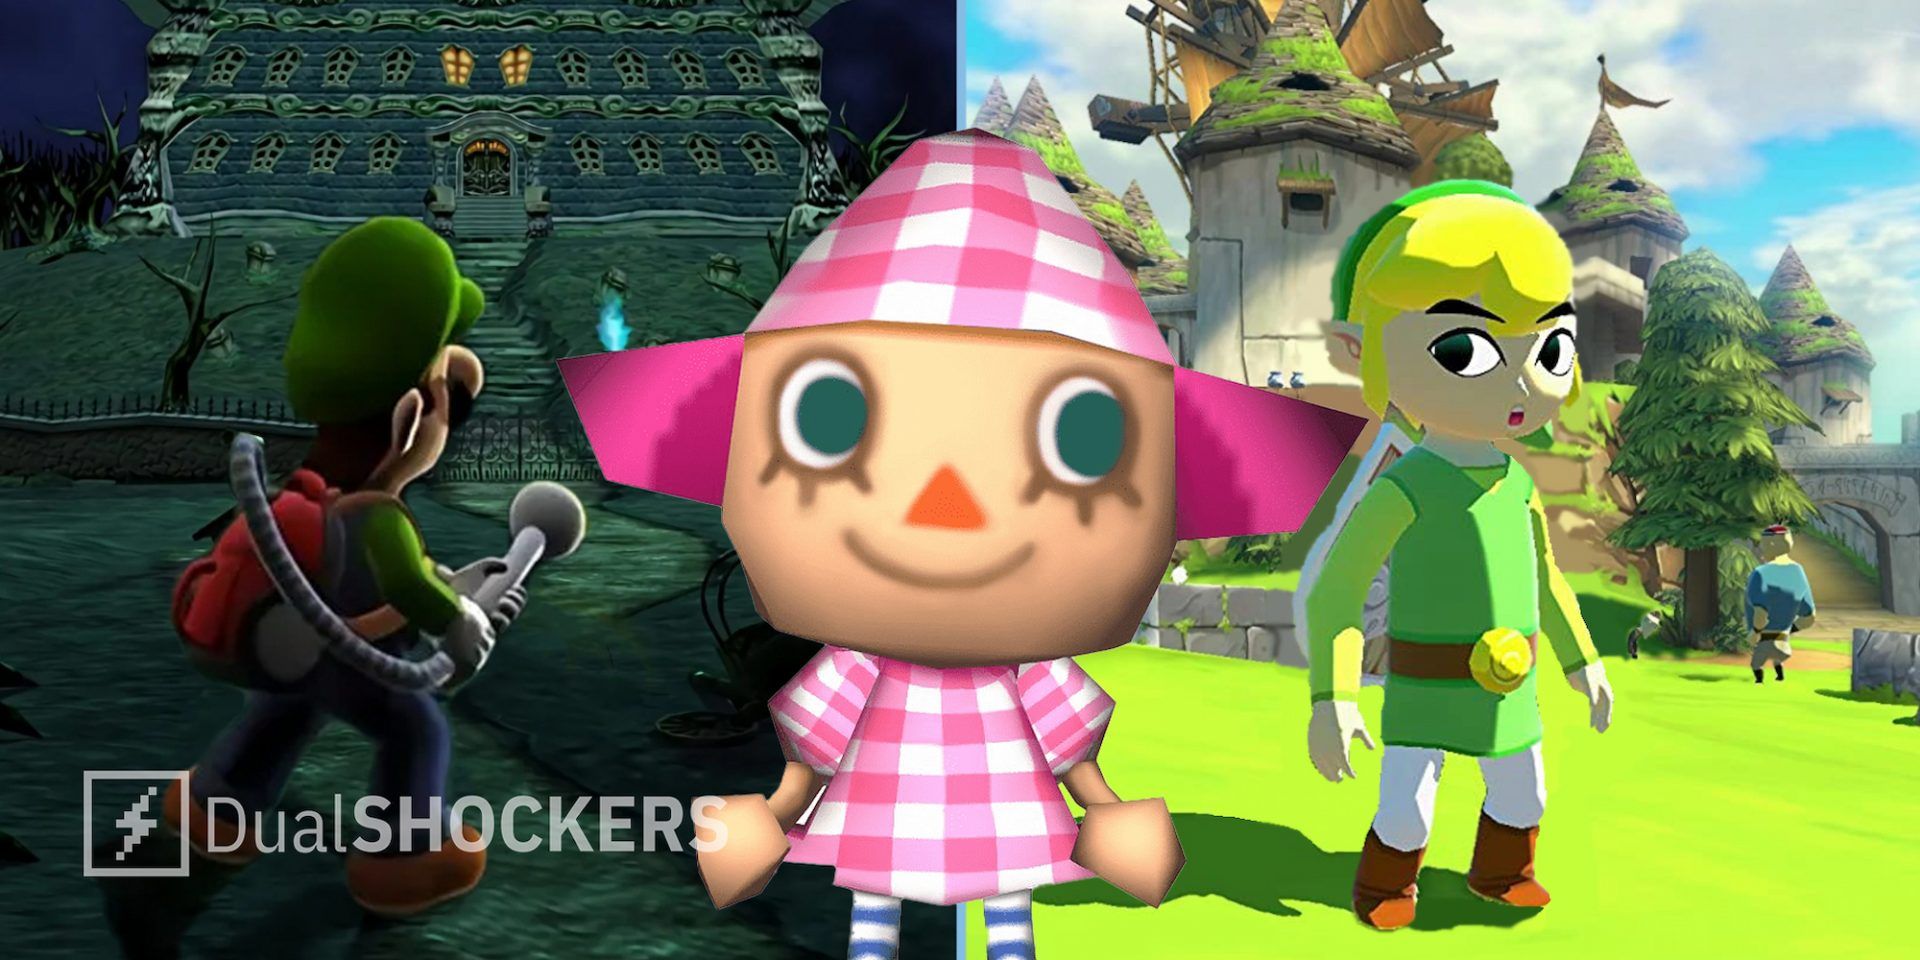 Luigi's Mansion, Animal Crossing Villager, and Link from Wind Waker side by side.